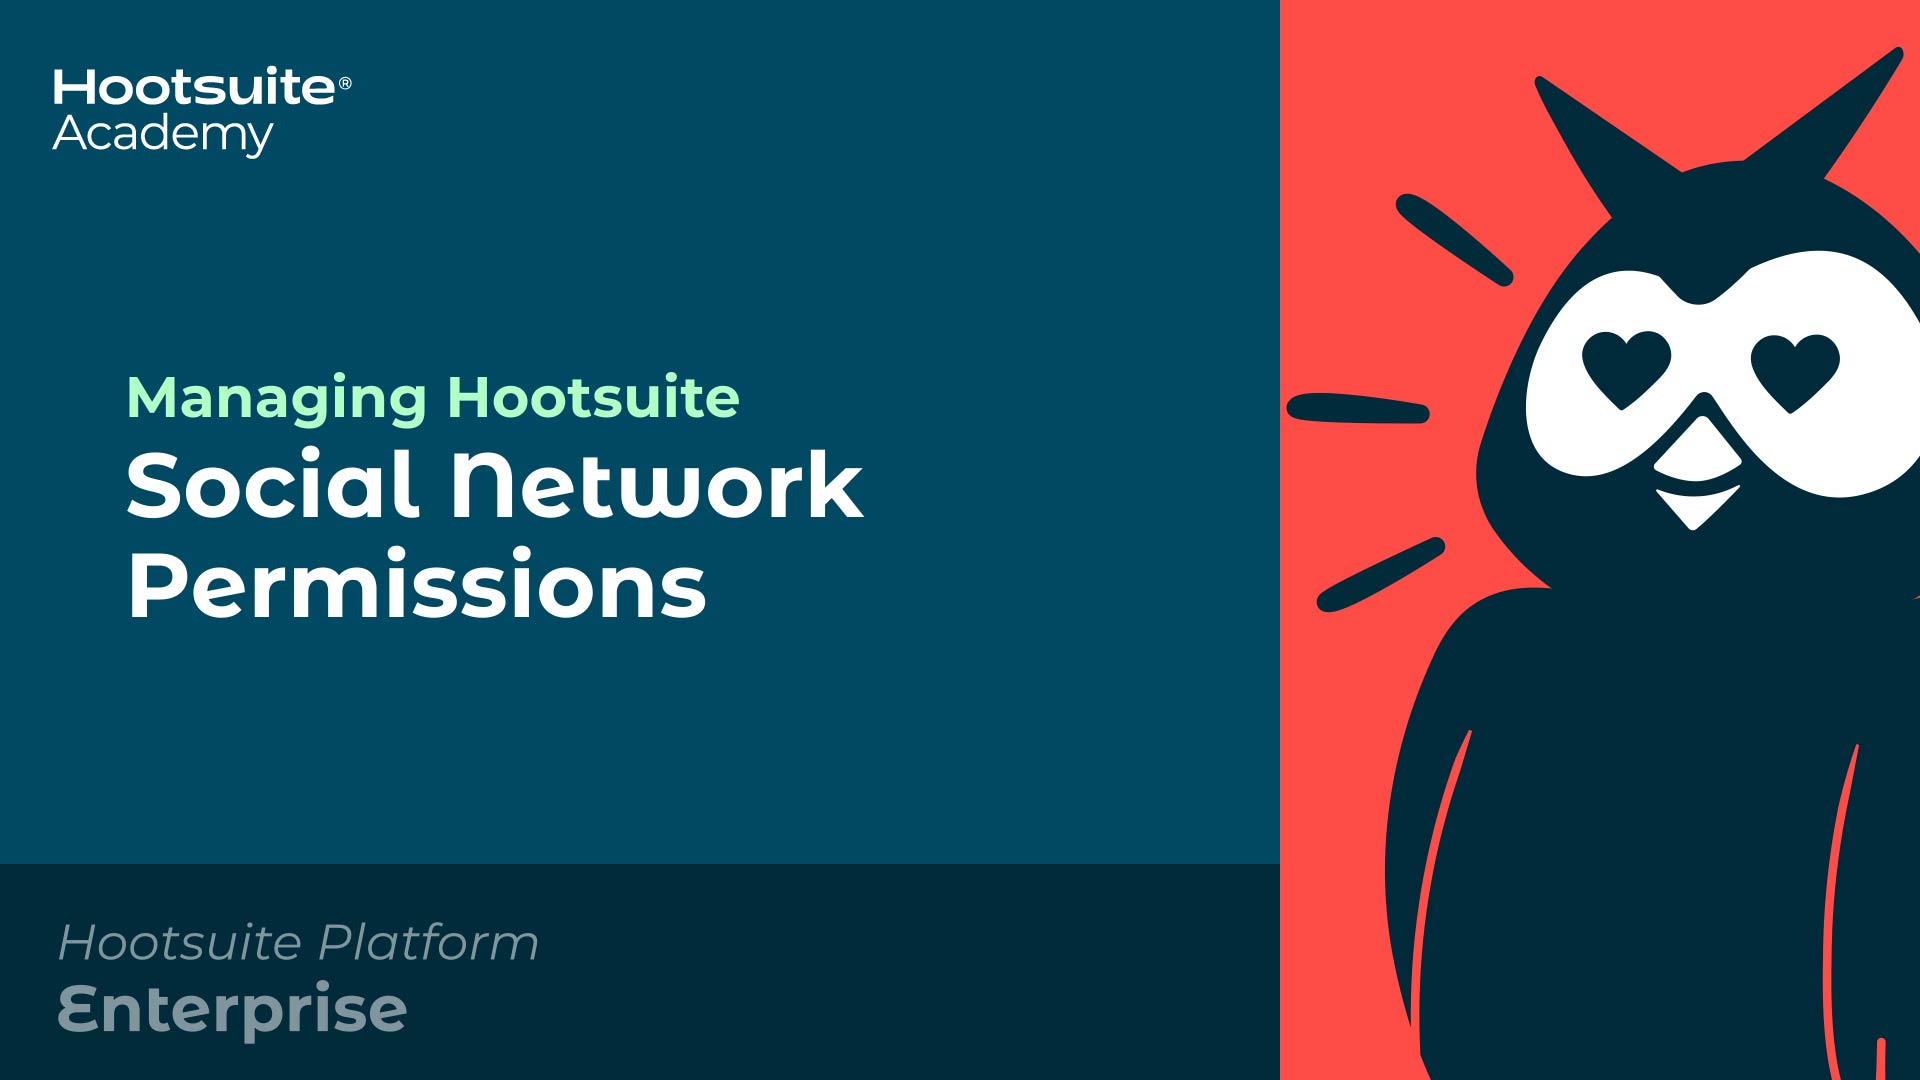 Managing Hootsuite social network permissions video